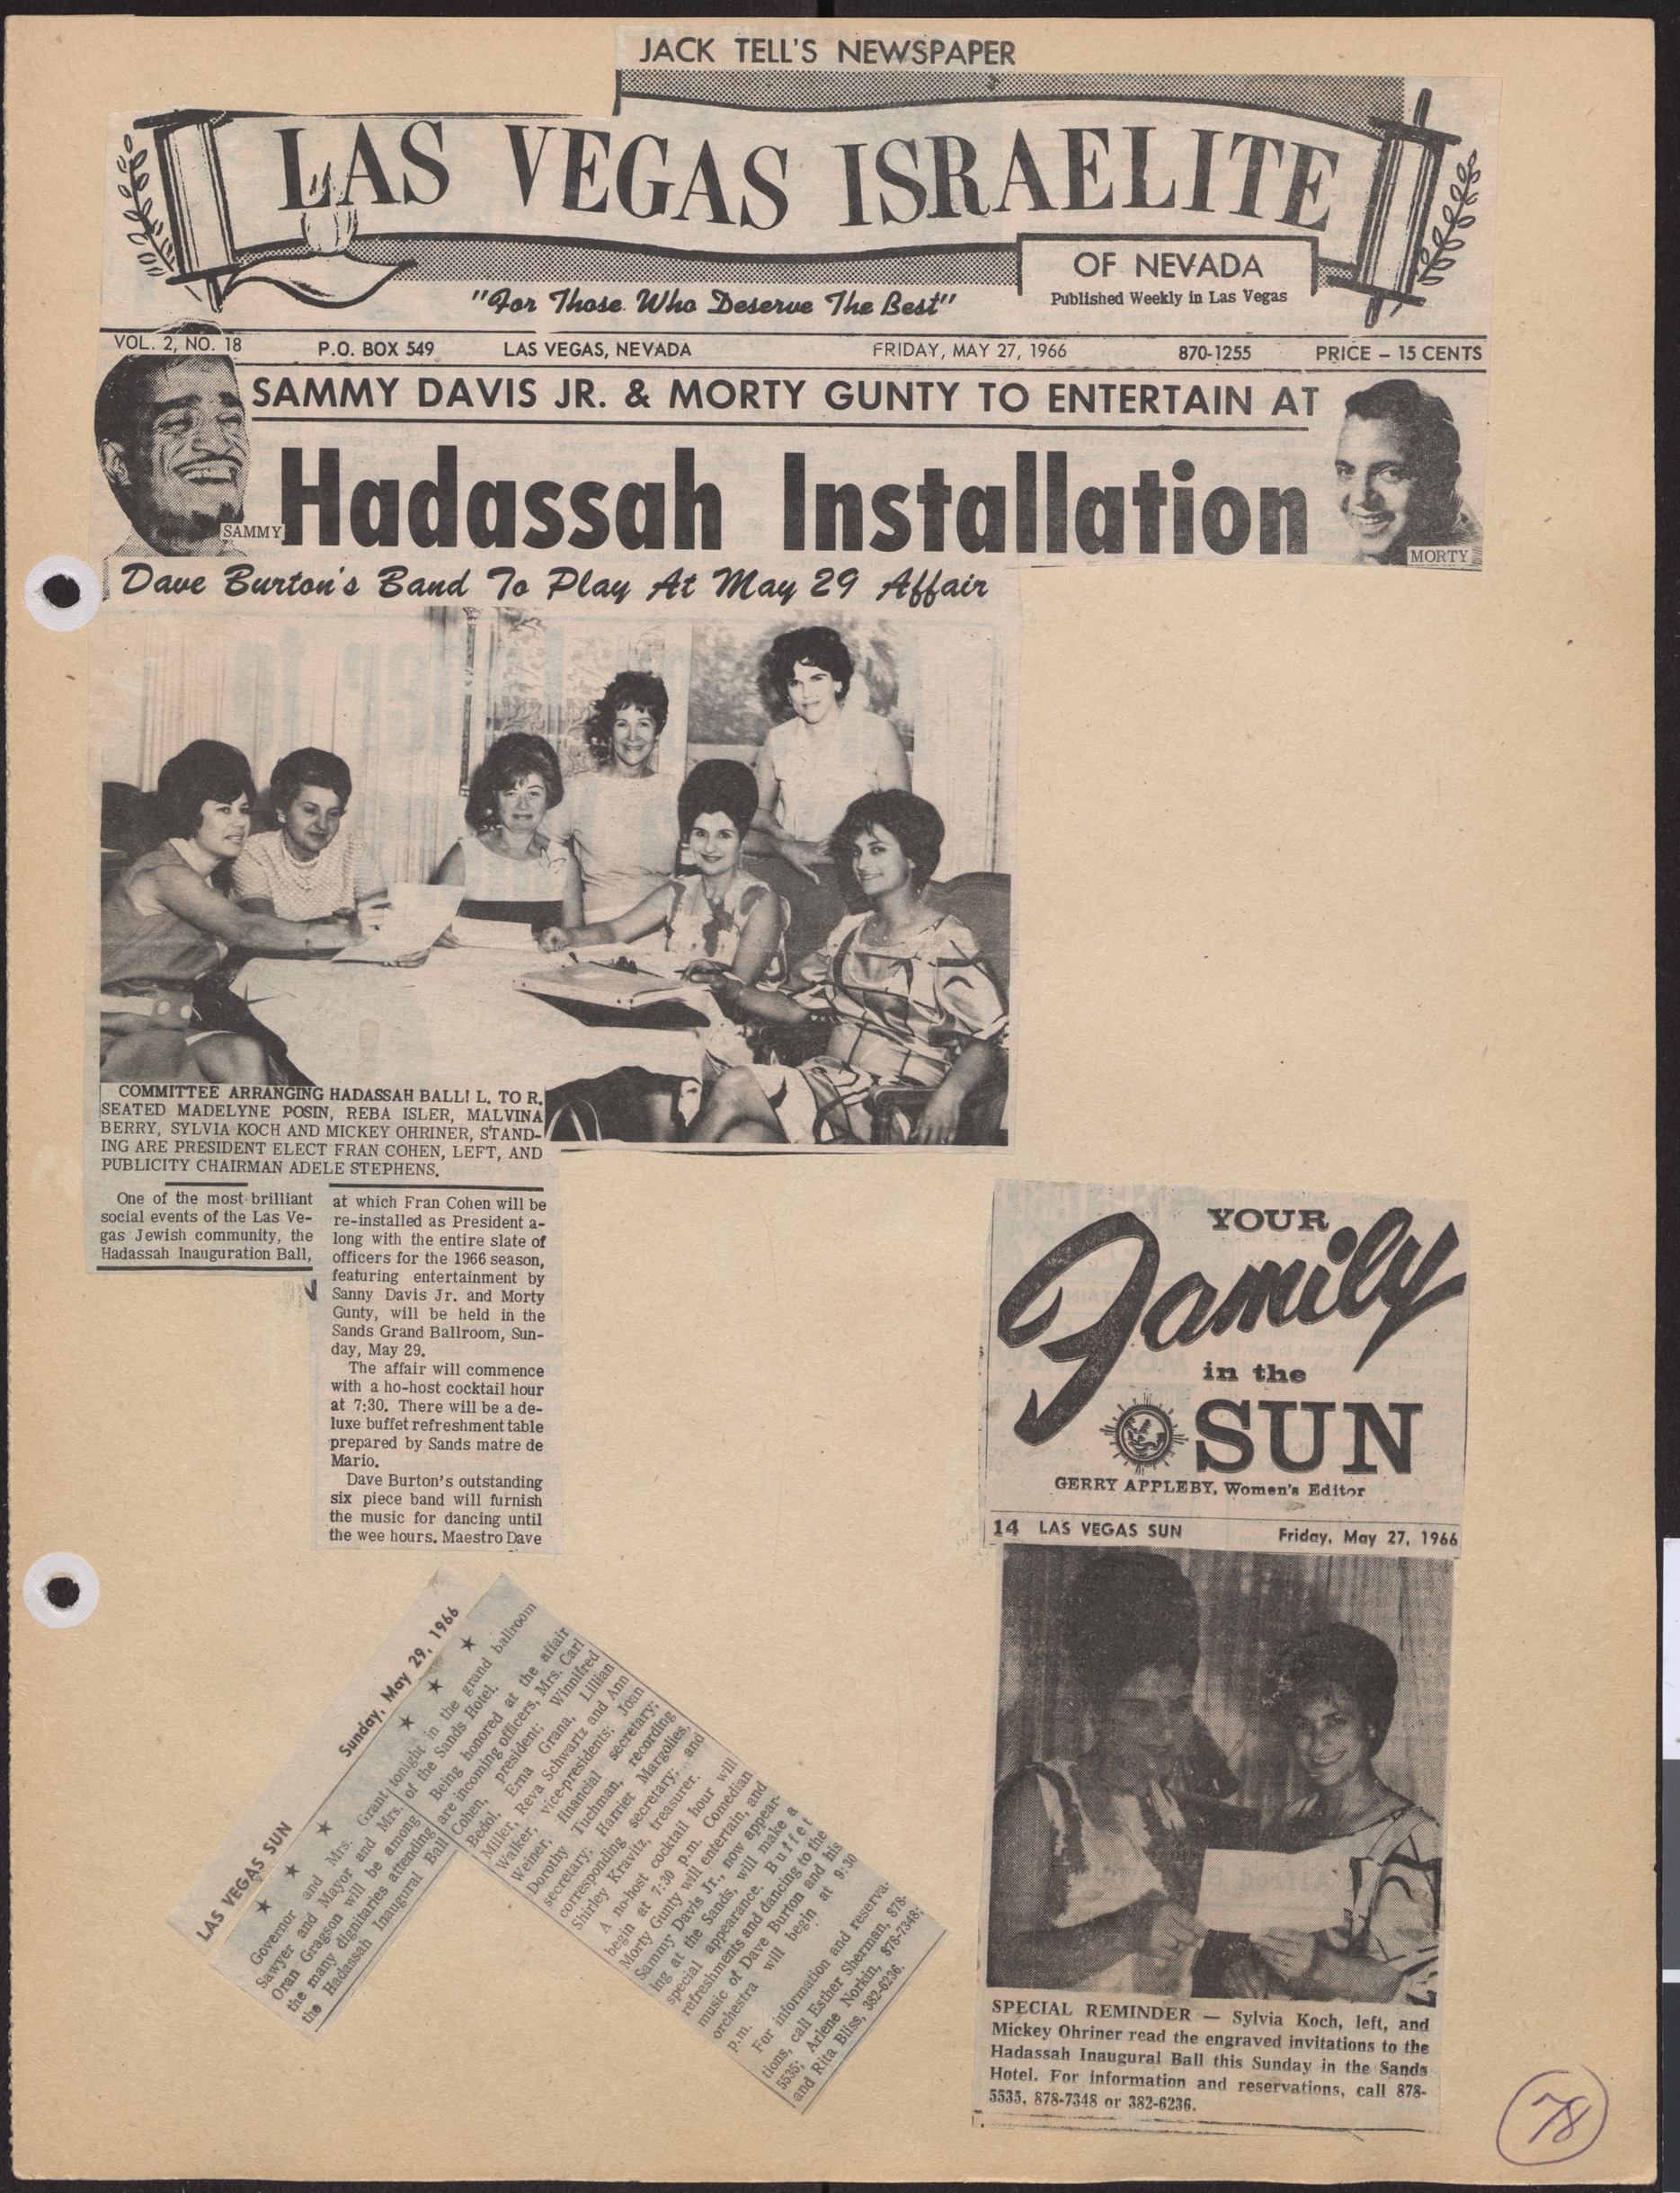 Newspaper clippings about Hadassah inauguration event, May 1966